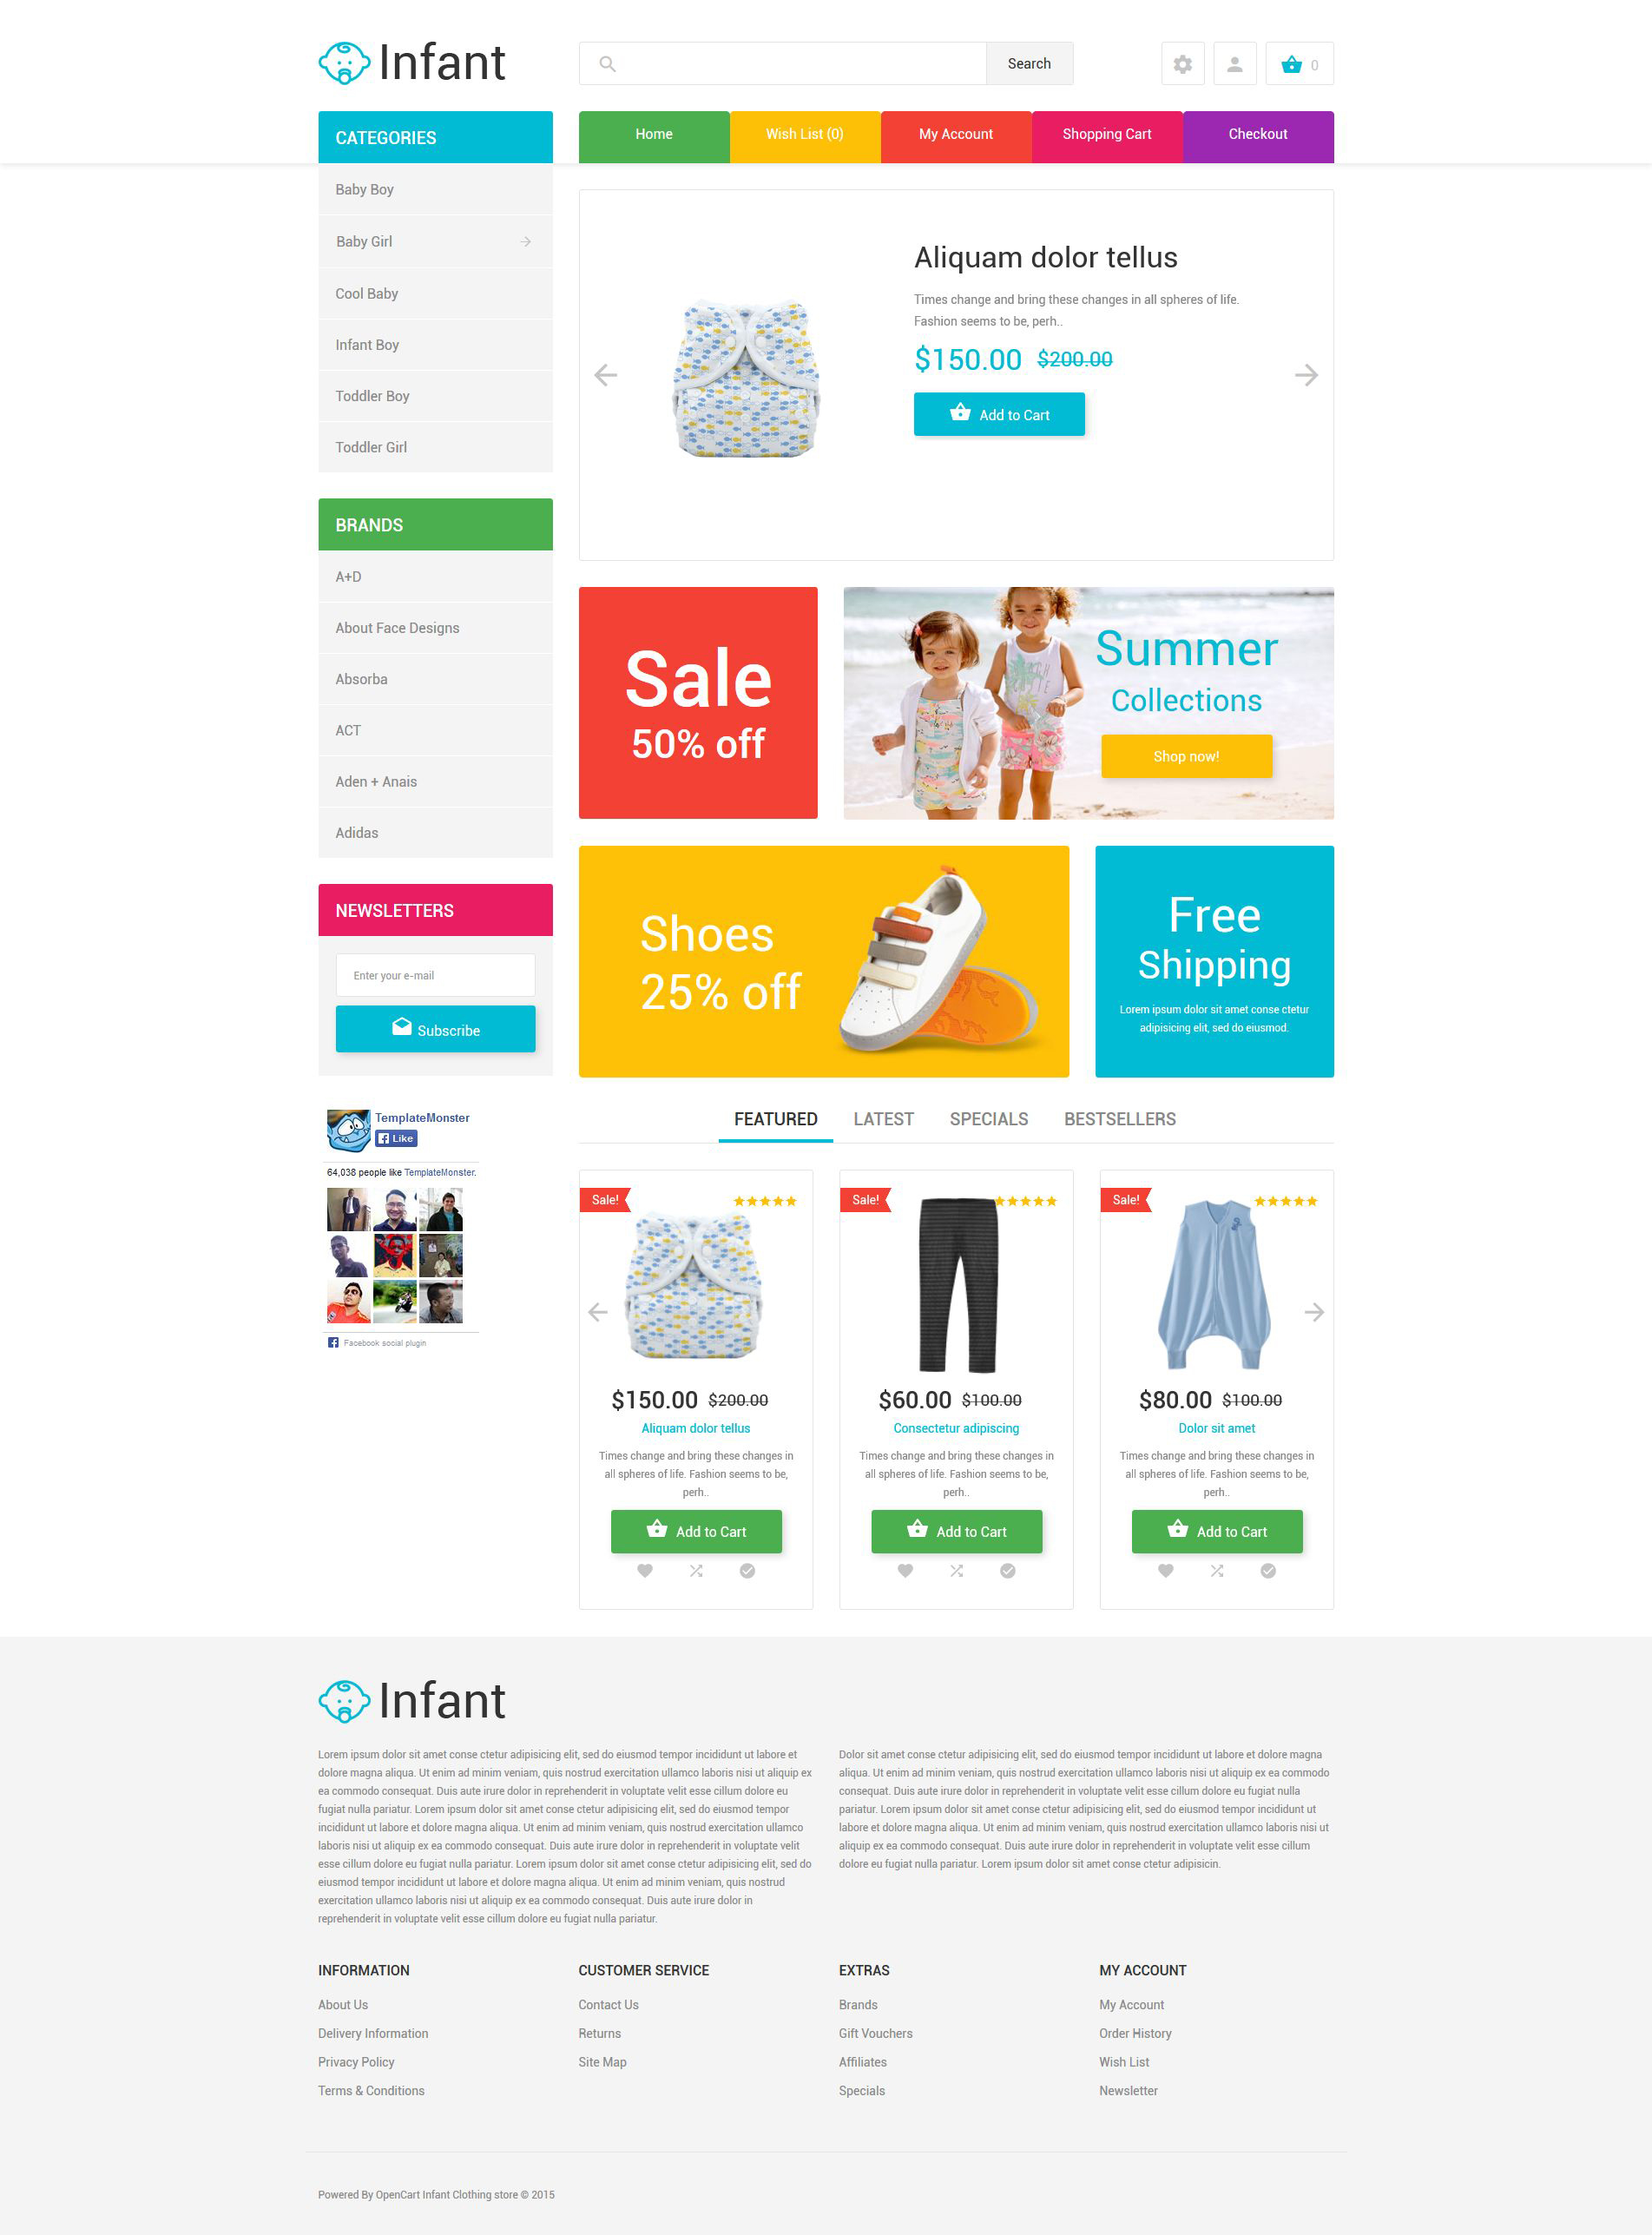 Infant Clothing Store OpenCart Template